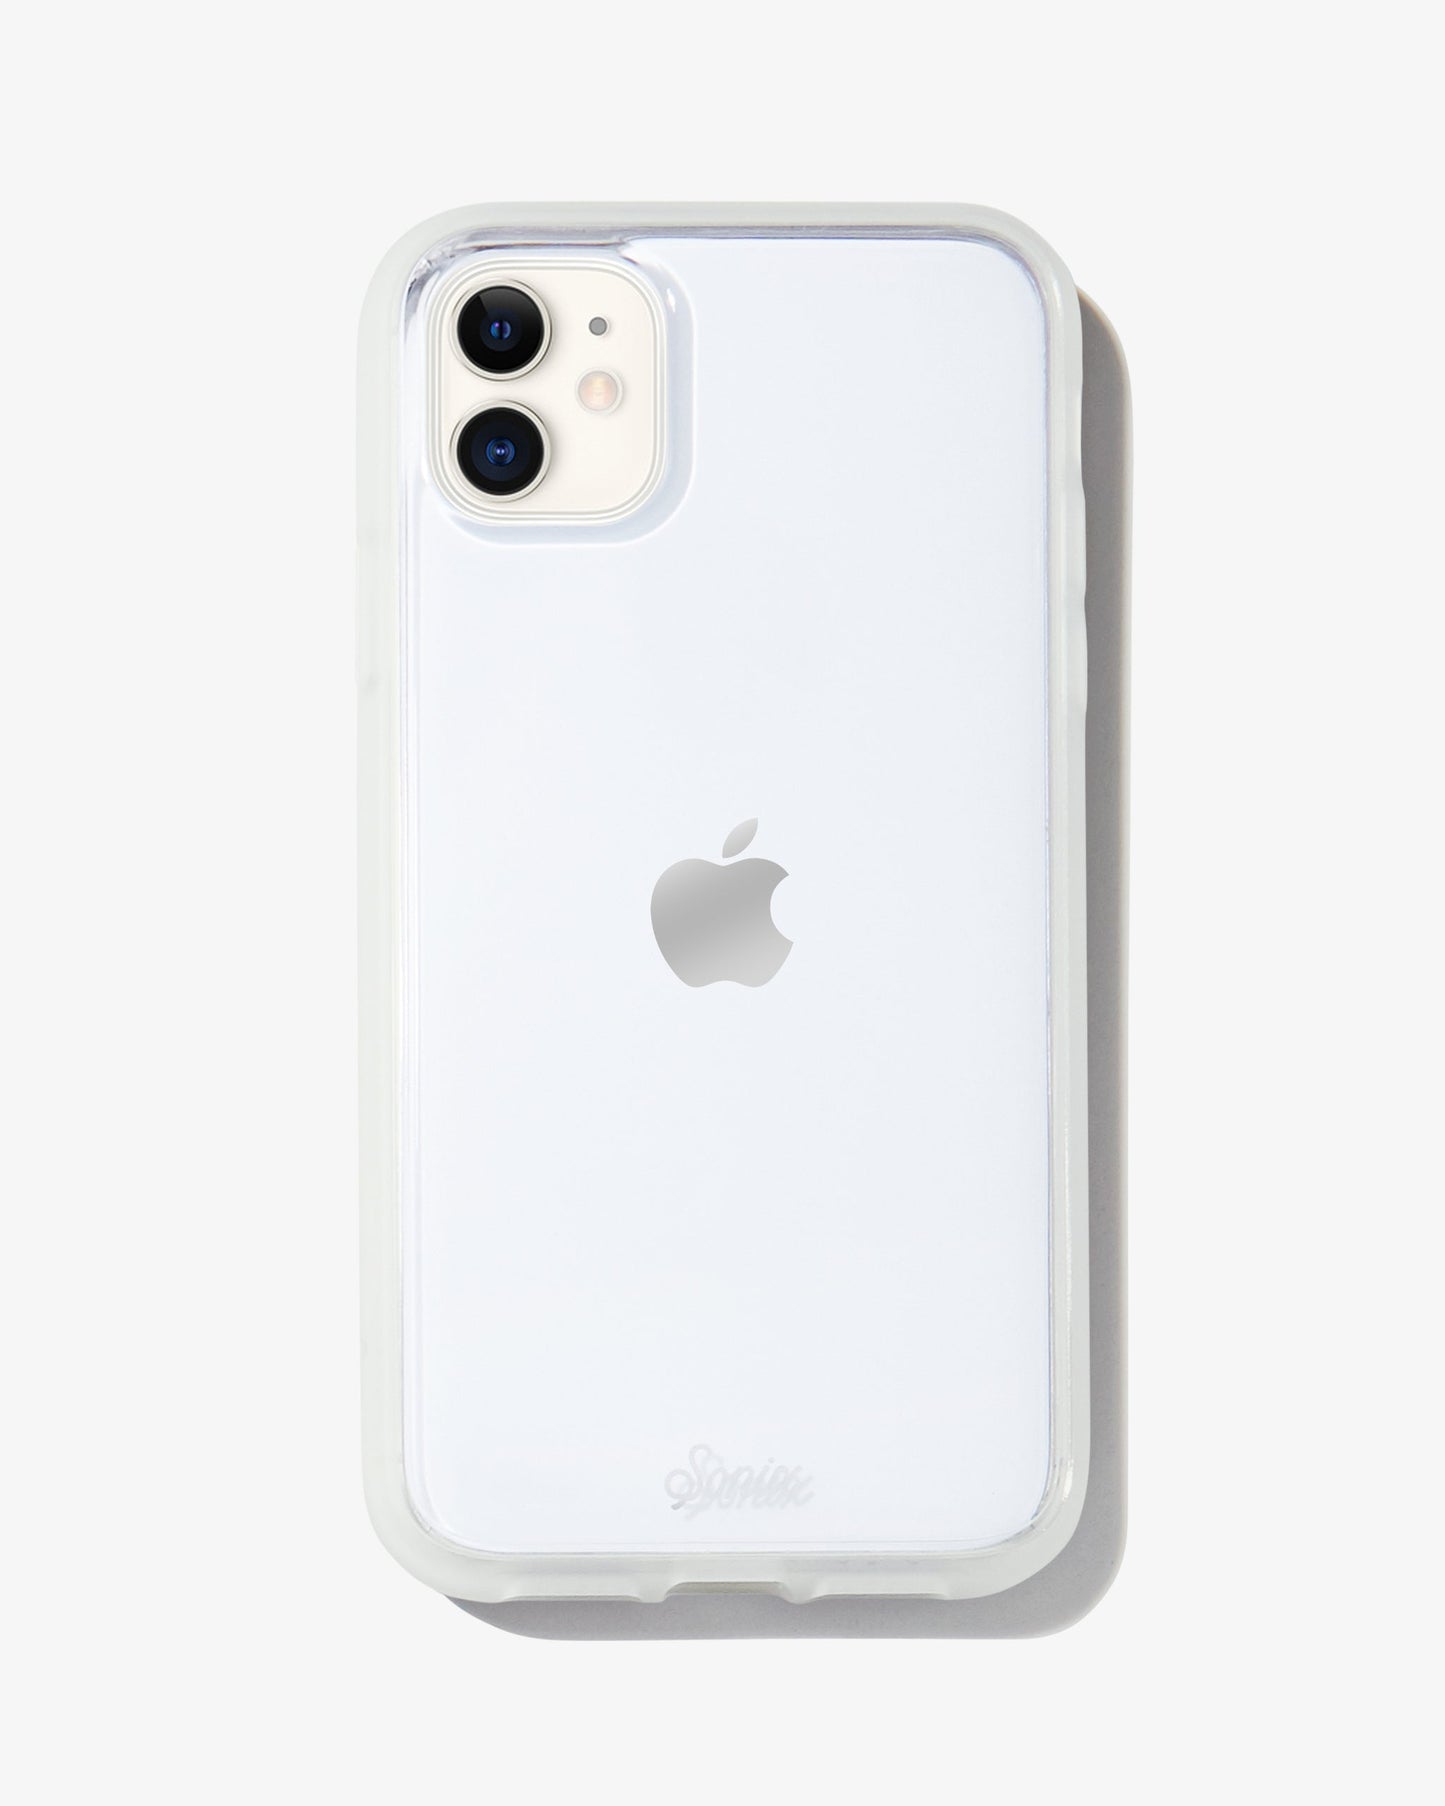 a clear case featuring a glow-in-the-dark bumper shown on an iphone 11